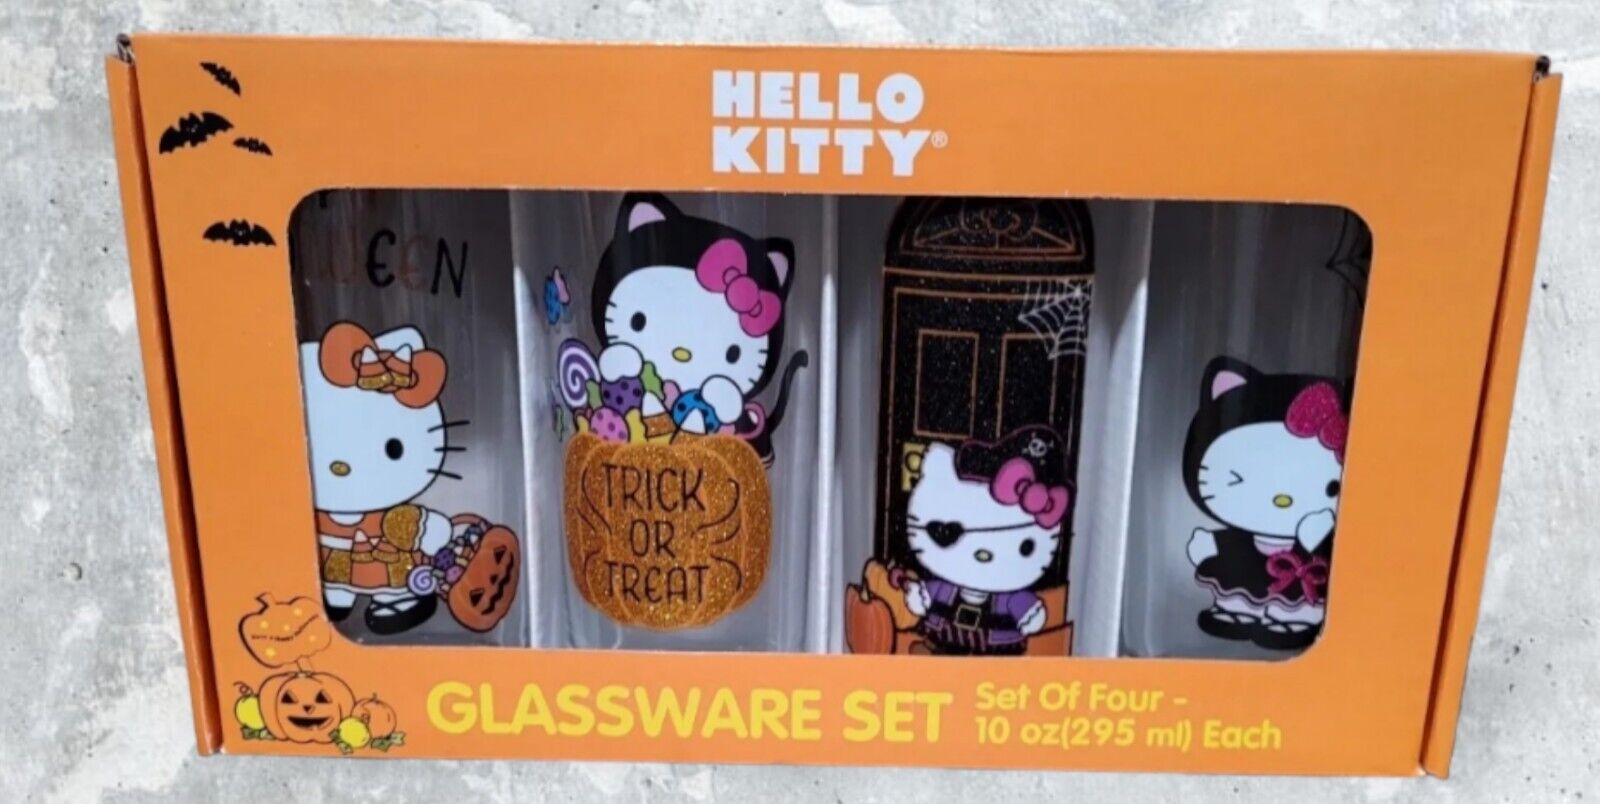 BRAND NEW Sanrio Hello Kitty Halloween Limited Edition Glassware FAST SHIPPING 